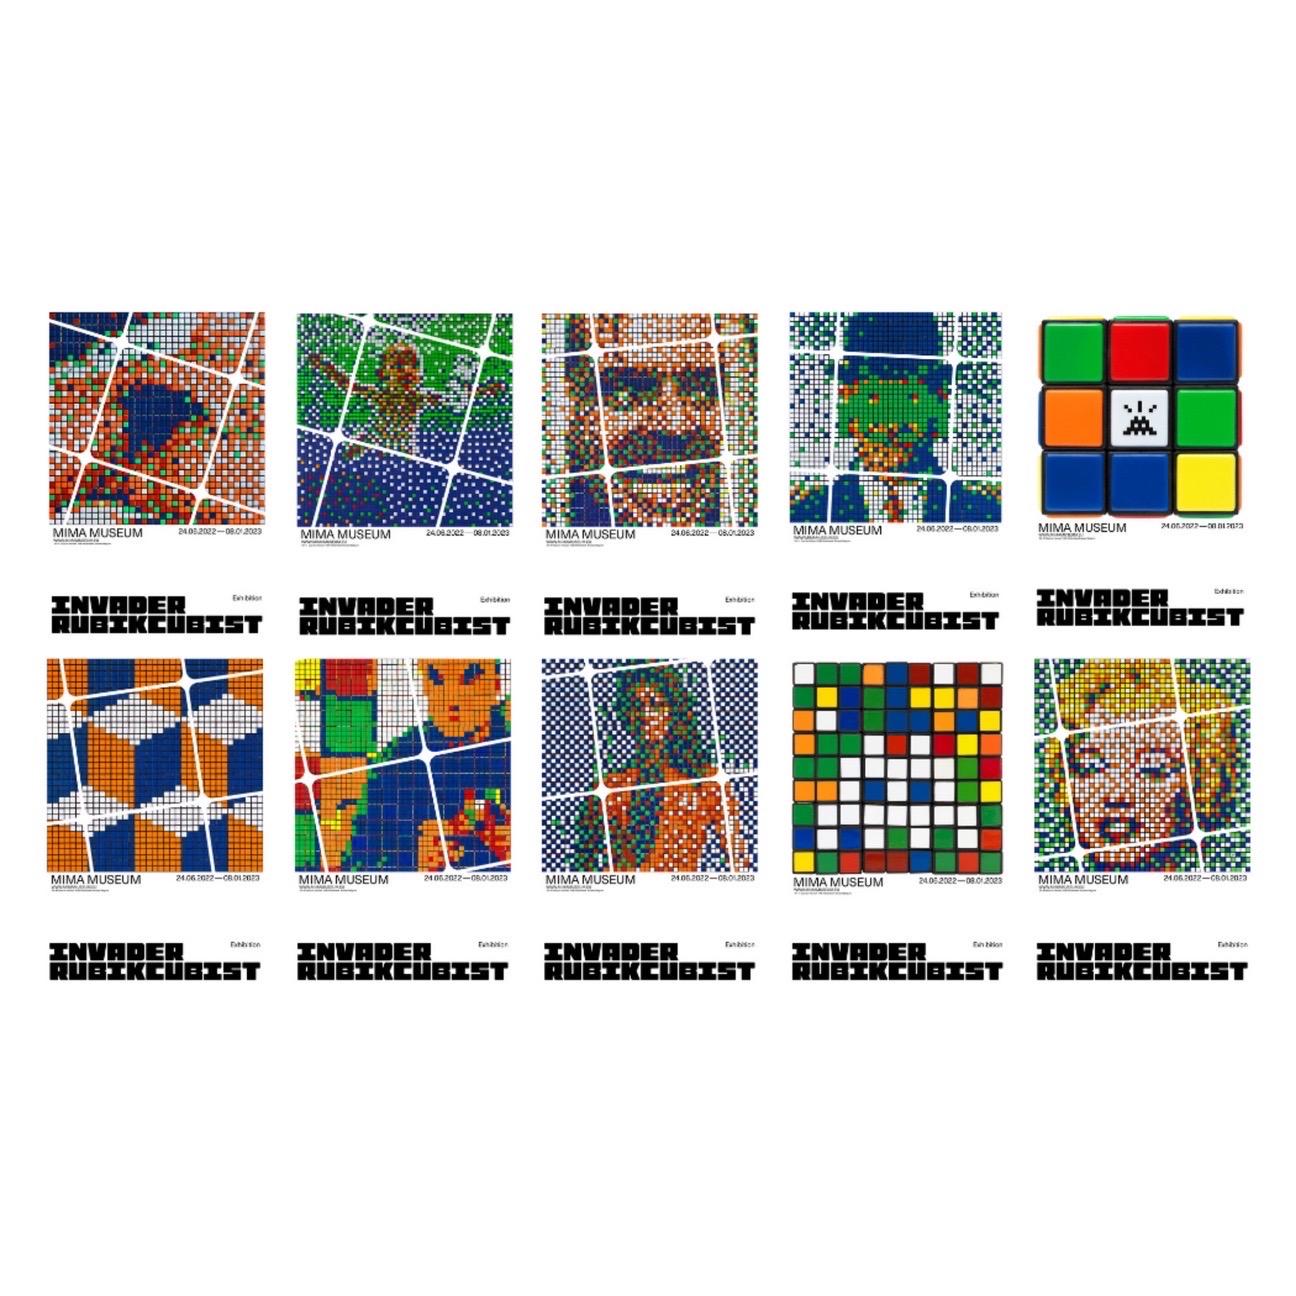 Invader, Rubikubist Print set, 2022

Exclusive set of 10 posters featuring some of Invaders’s most famous pieces on display at the Mima Museum. Printed on Acrtic Volume Silk 130. Gr fine art paper

40.6 x 61 cm ( 26 x 24 in) 

Comes with gallery